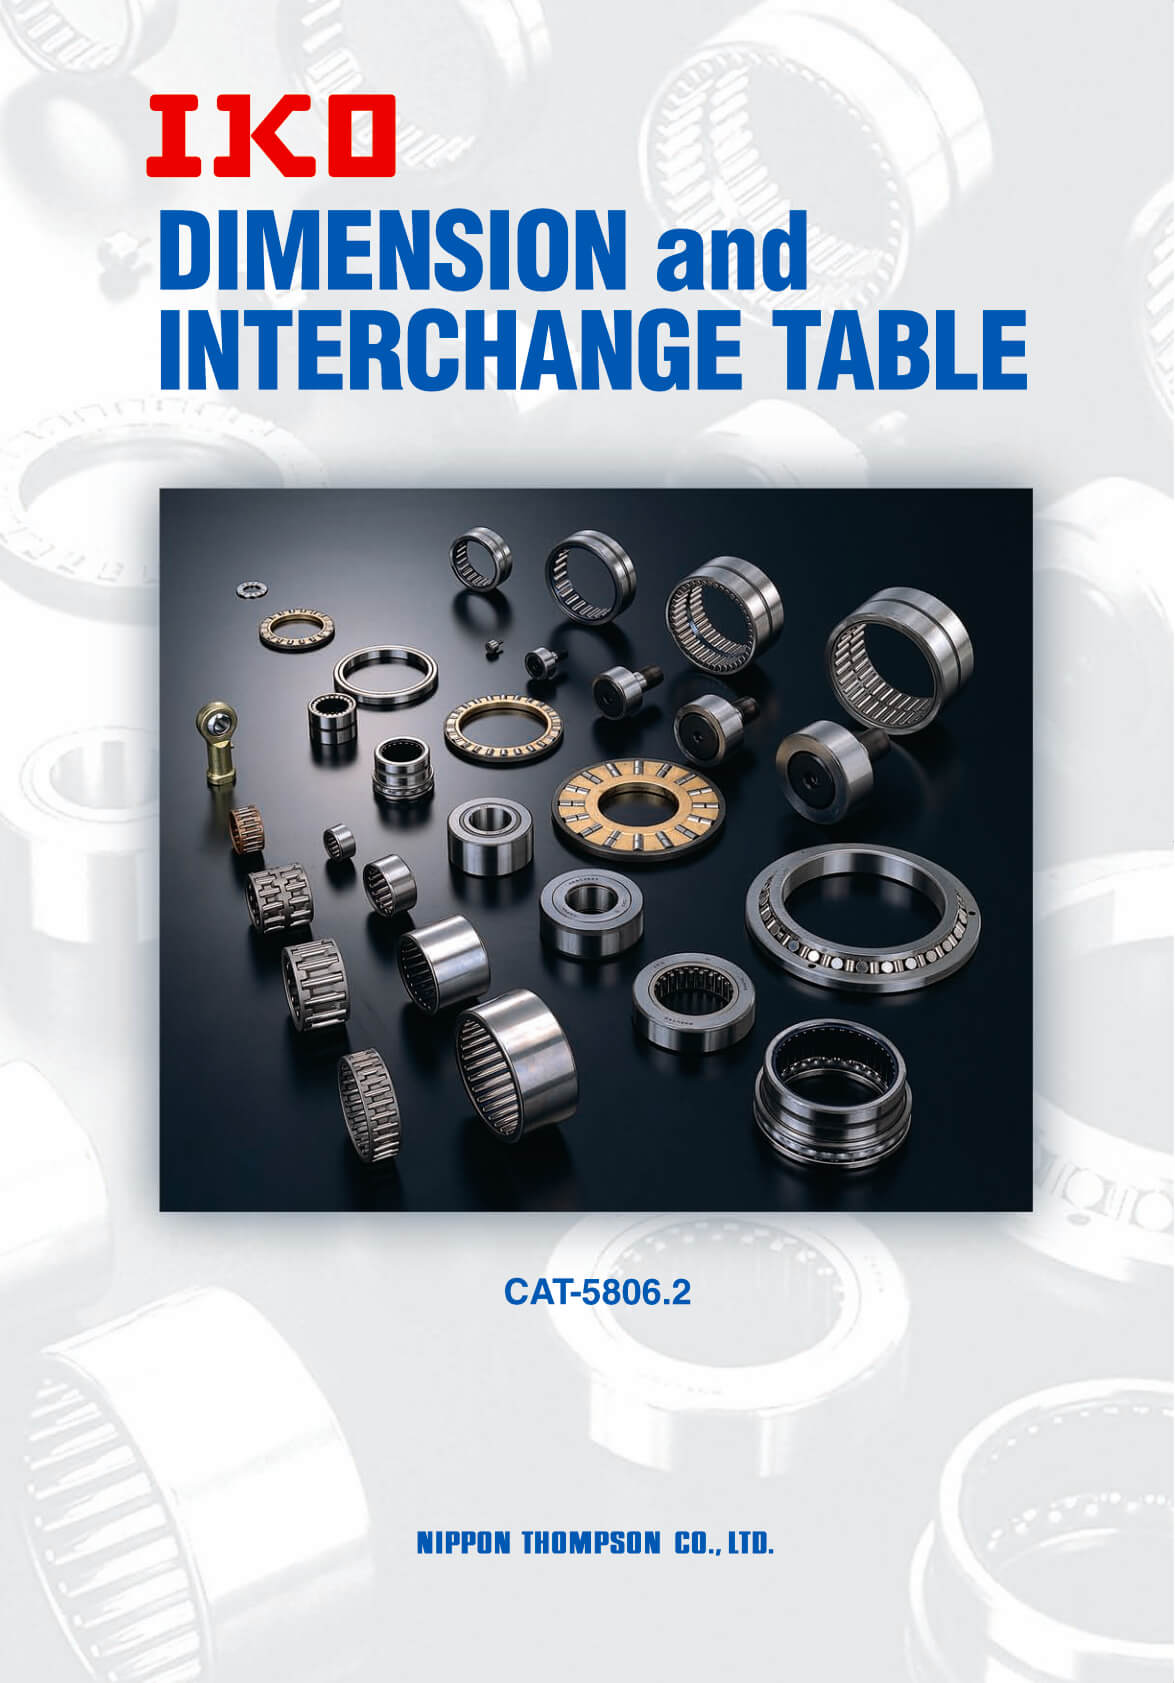 Dimension and Interchange Table